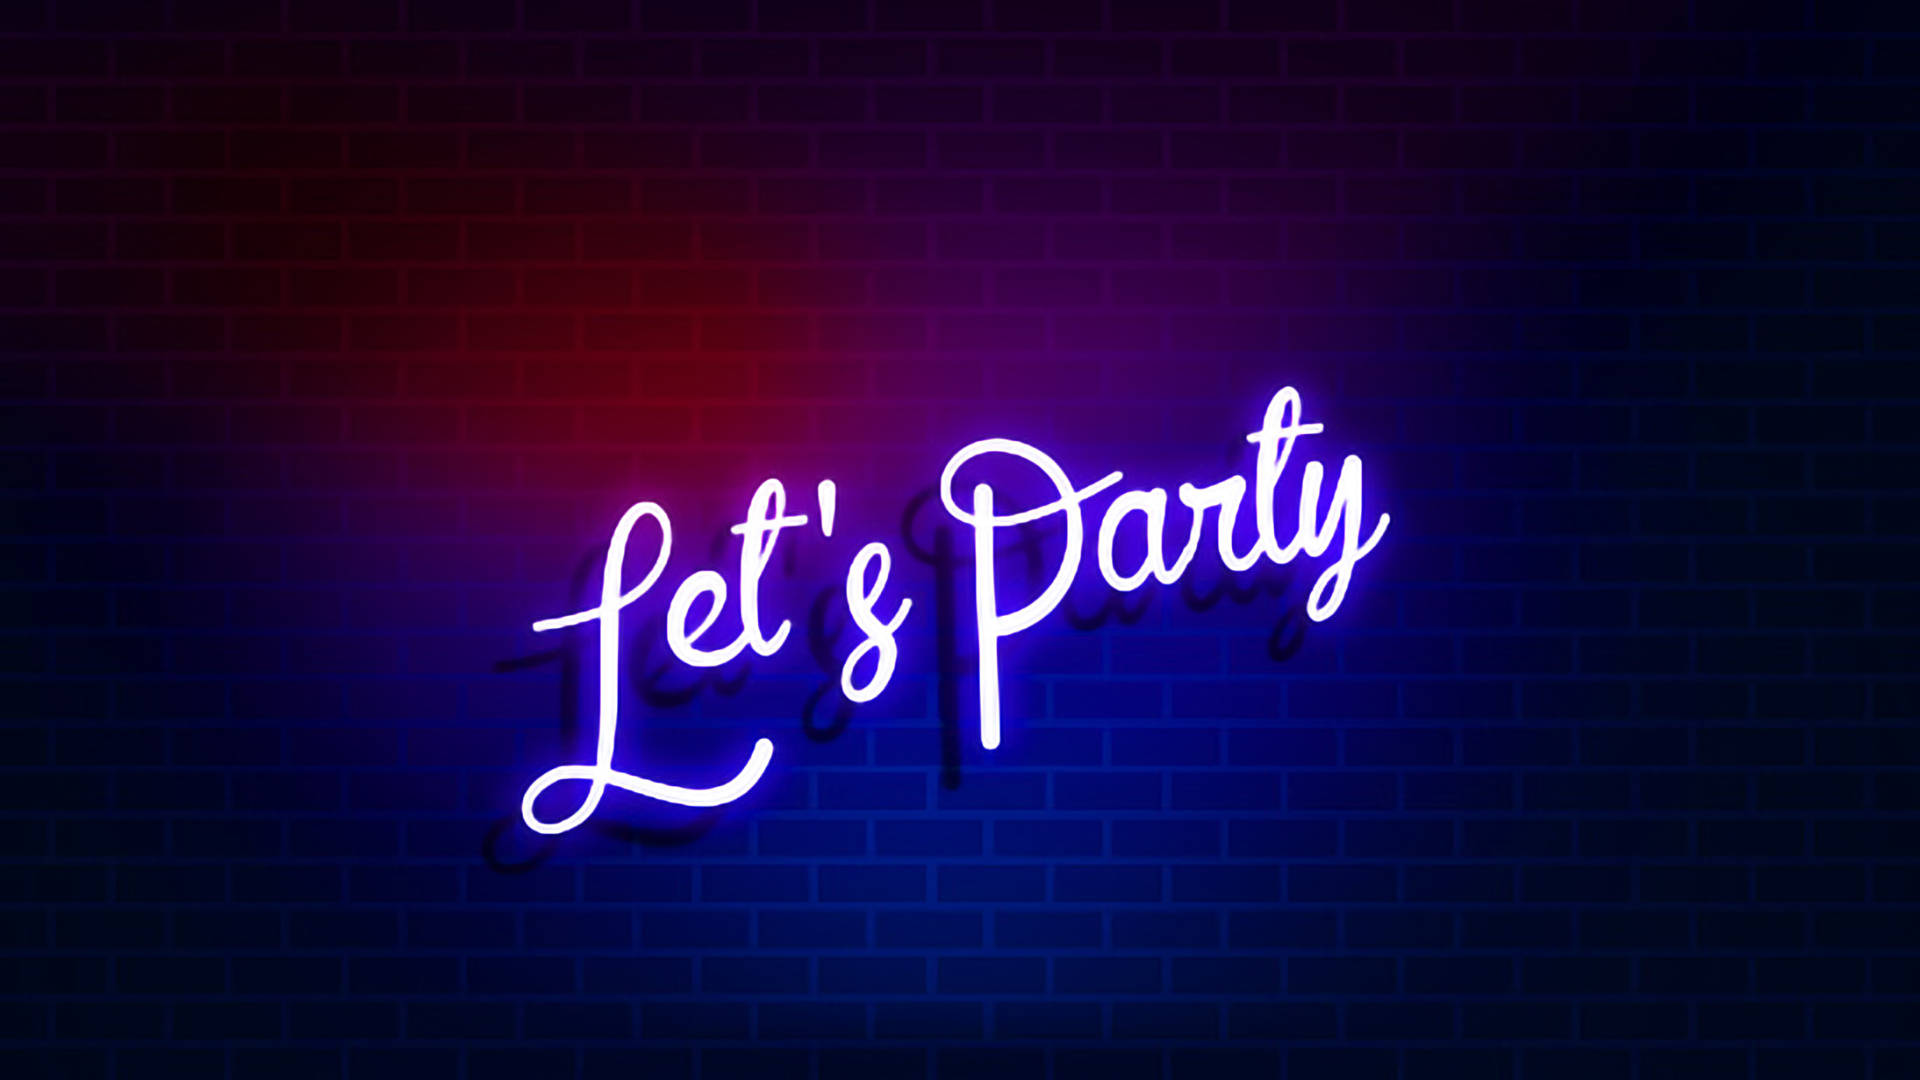 Let’s Party Neon Background Background